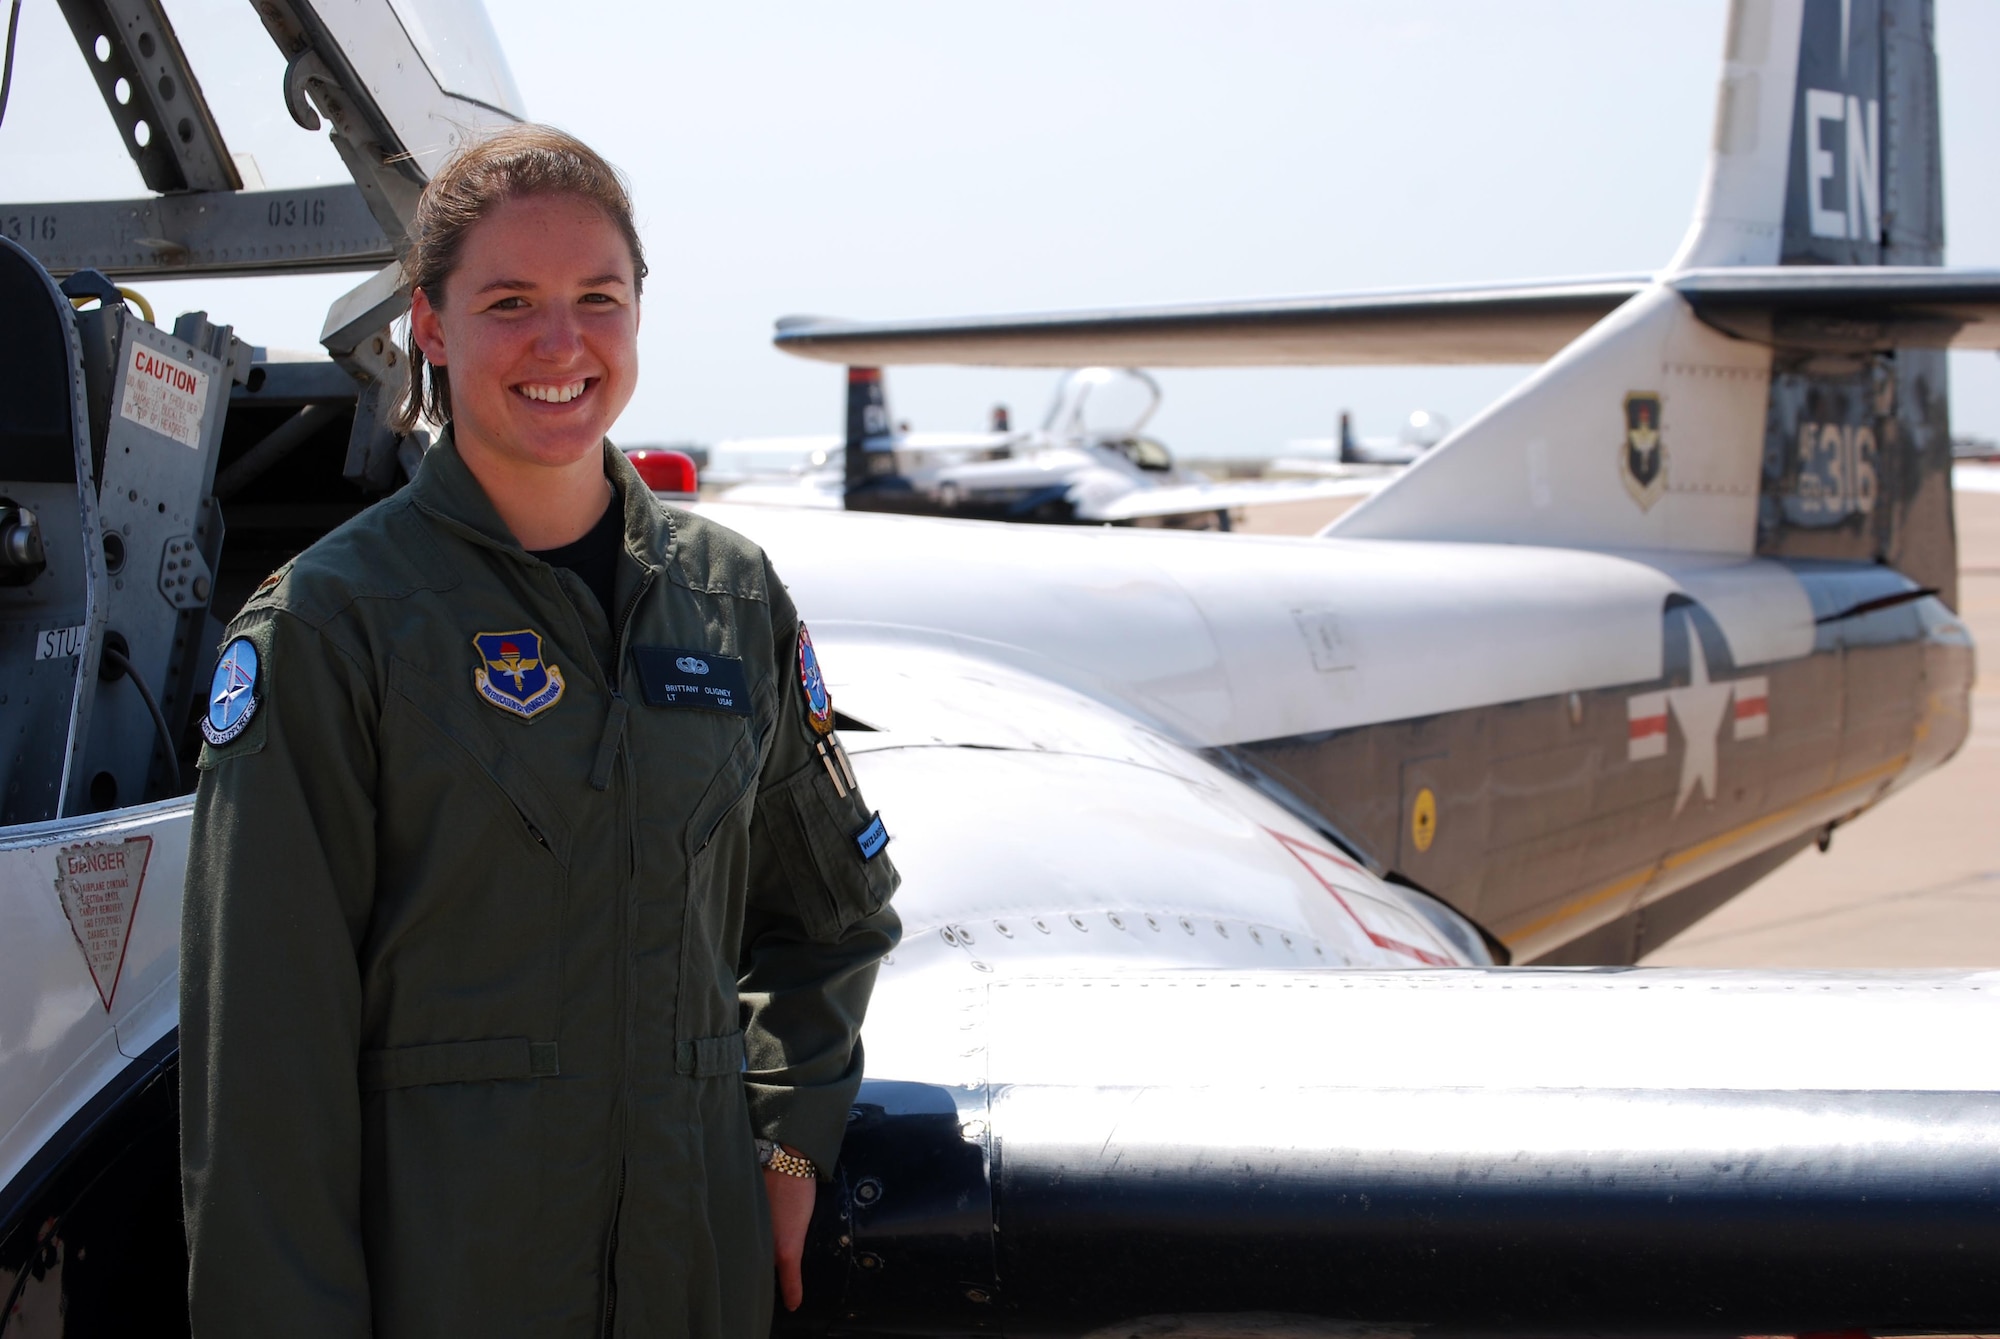 Flying has been a dream of 2nd Lt. Brittany Oligney's since she flew her uncle's float plane when she was in the 7th grade. Now the U.S. Air Force student pilot at the 80th Flying Training Wing's Euro-NATO Joint Jet Pilot Training Program is seeing her dream come to fruition. (U.S. Air Force photo/John Ingle)